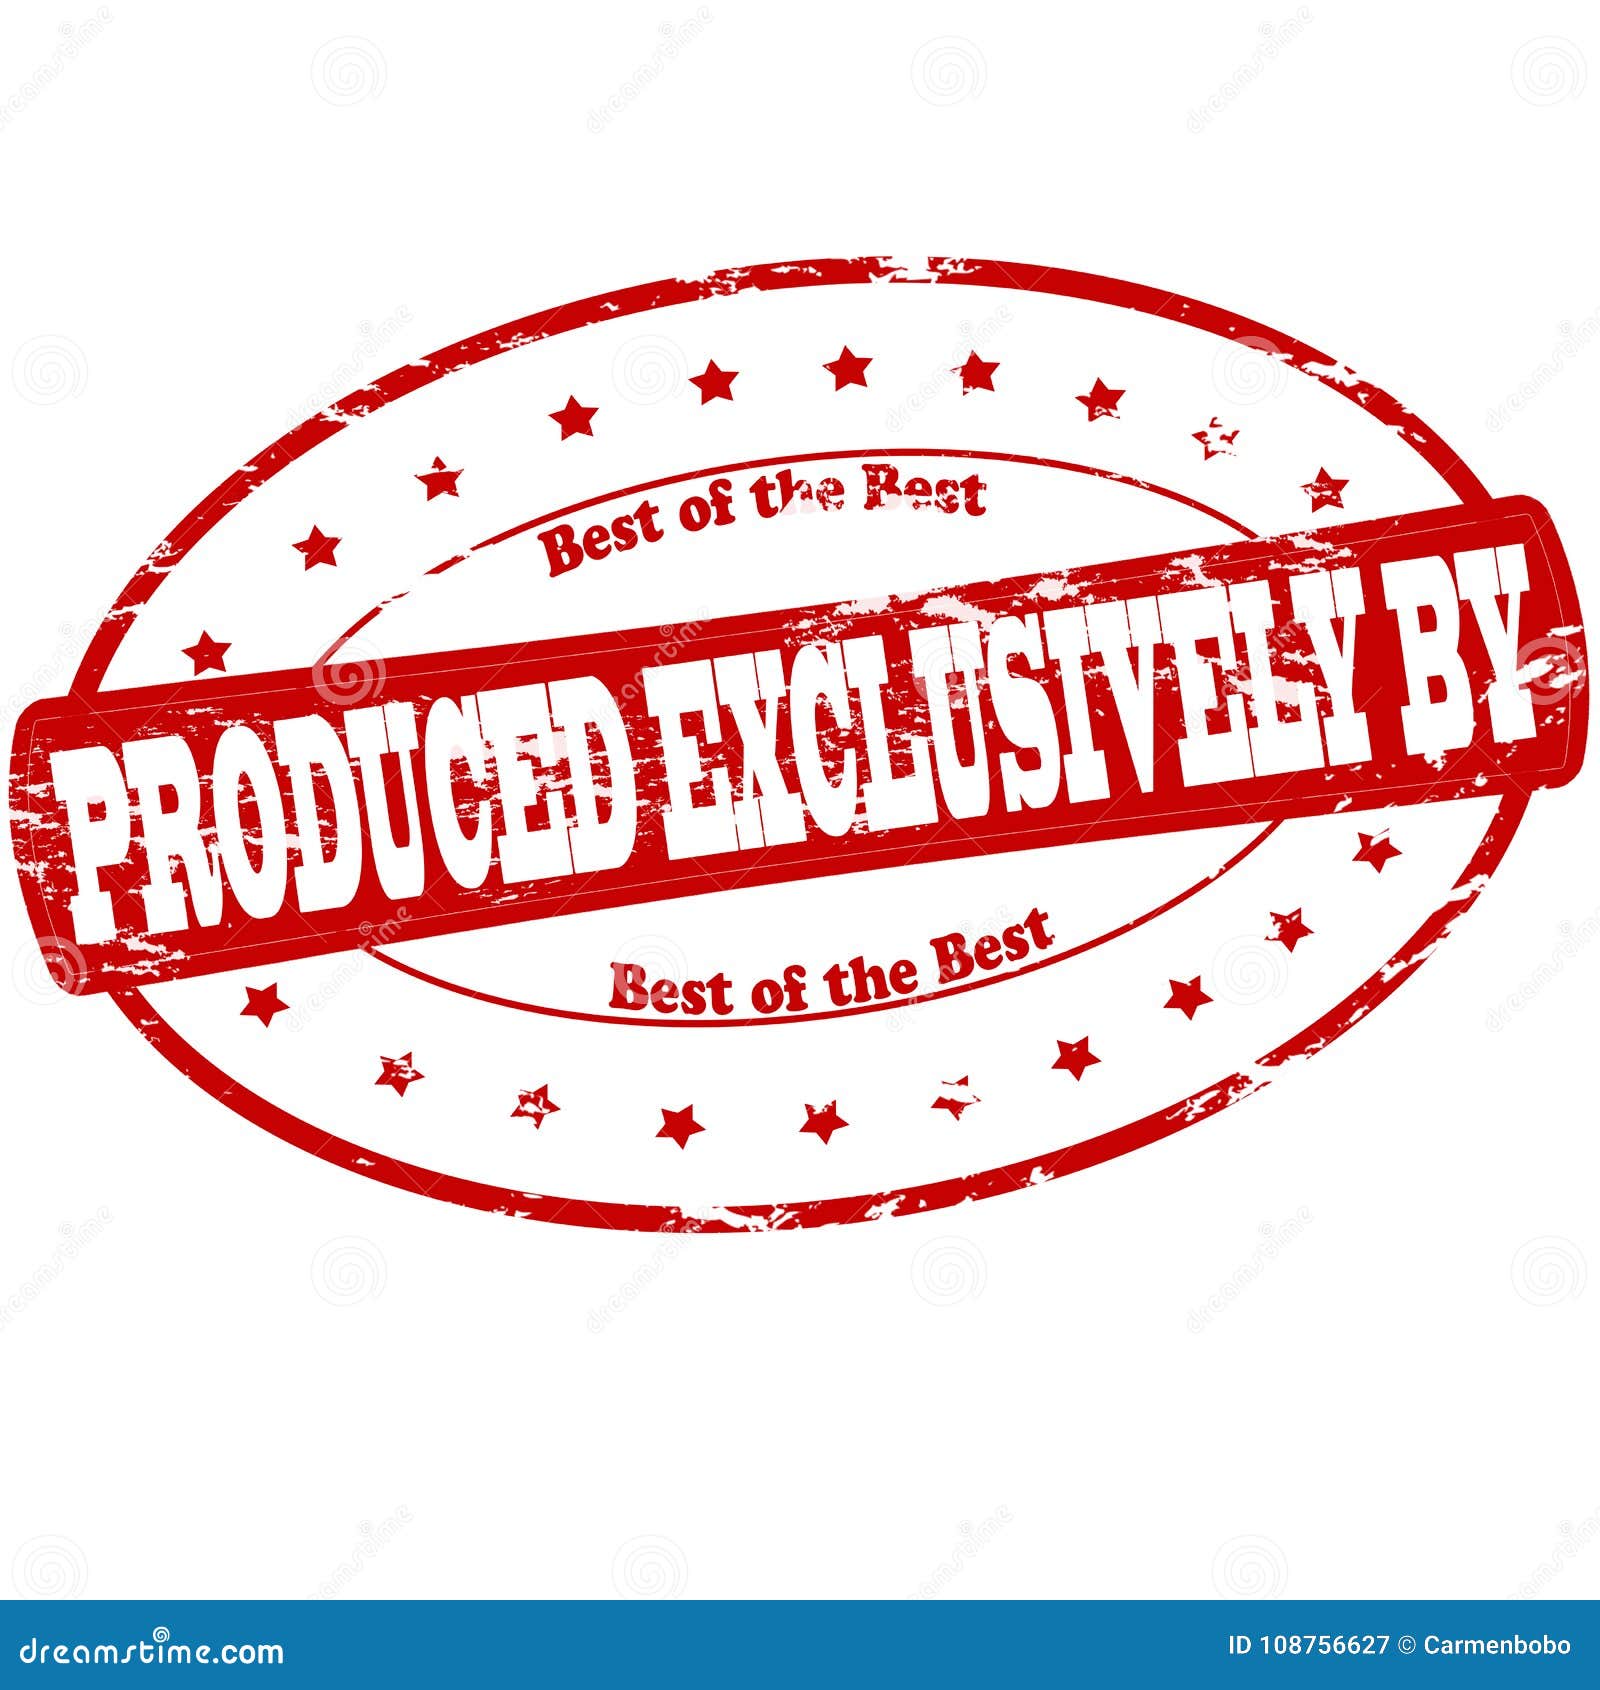 Produced Exclusively By Stamp On White Background Stock Image ...